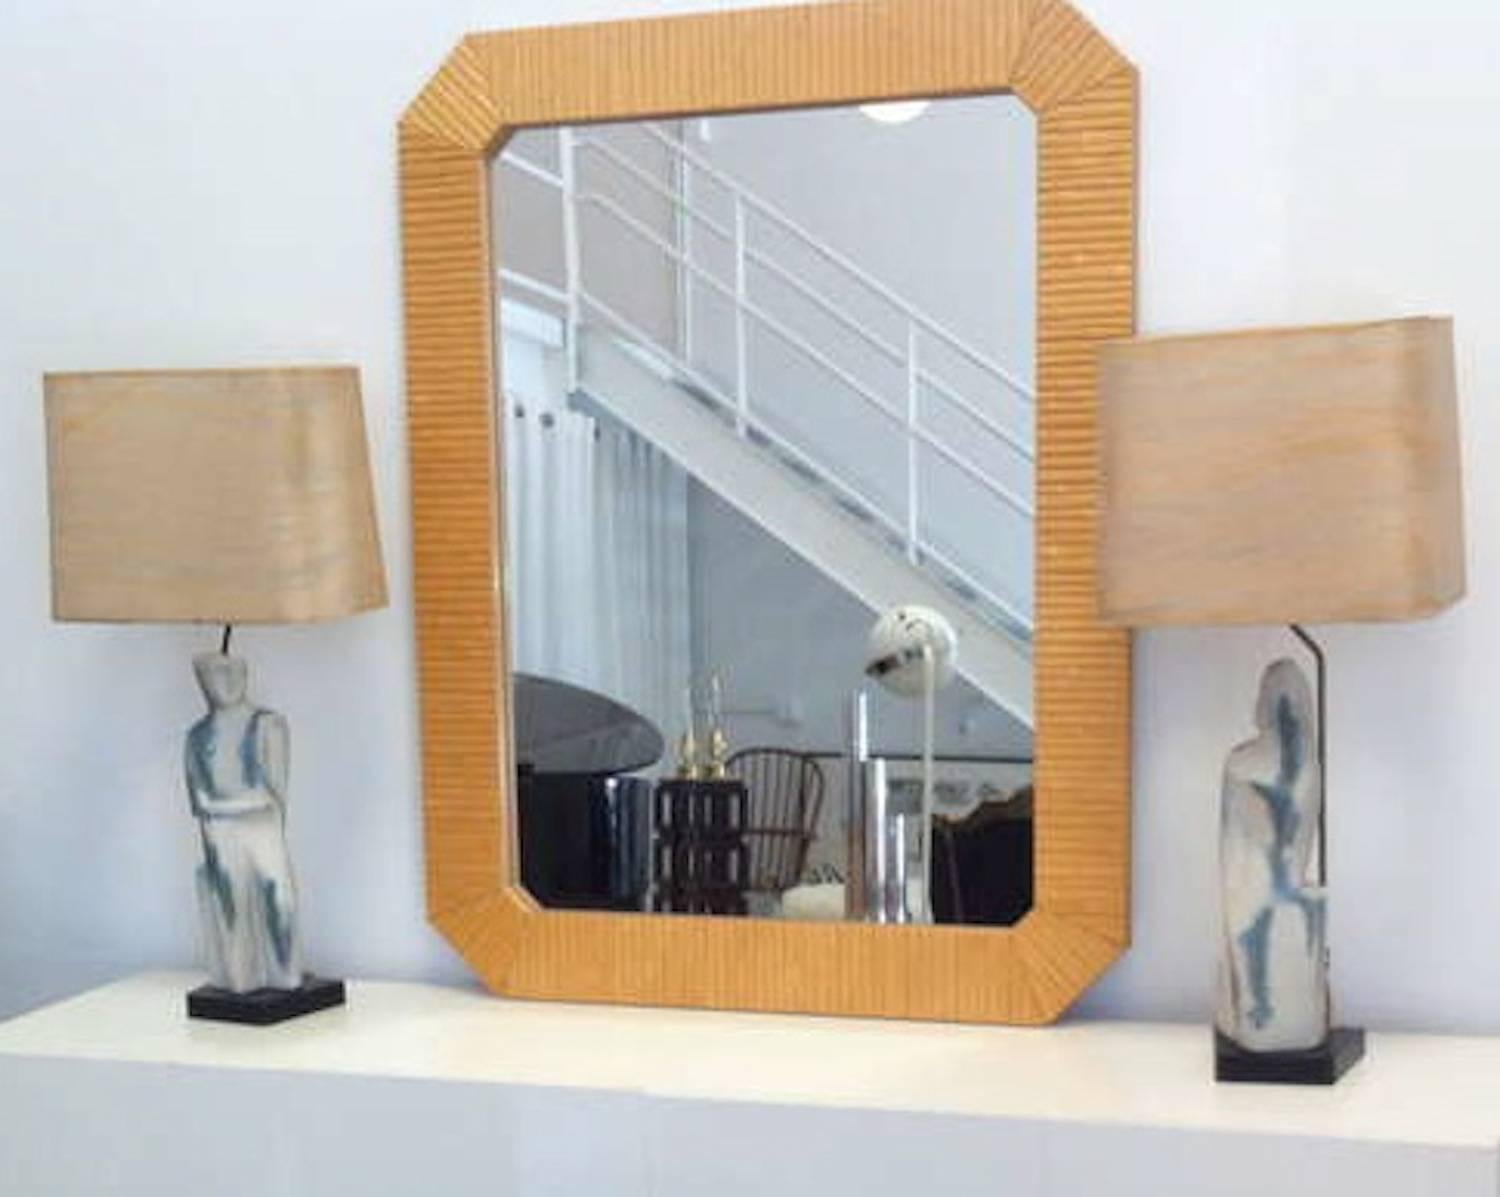 Striking postmodern faux bamboo carved wood mirror, circa 1970s-1980s.

Outside dimensions: 53.25